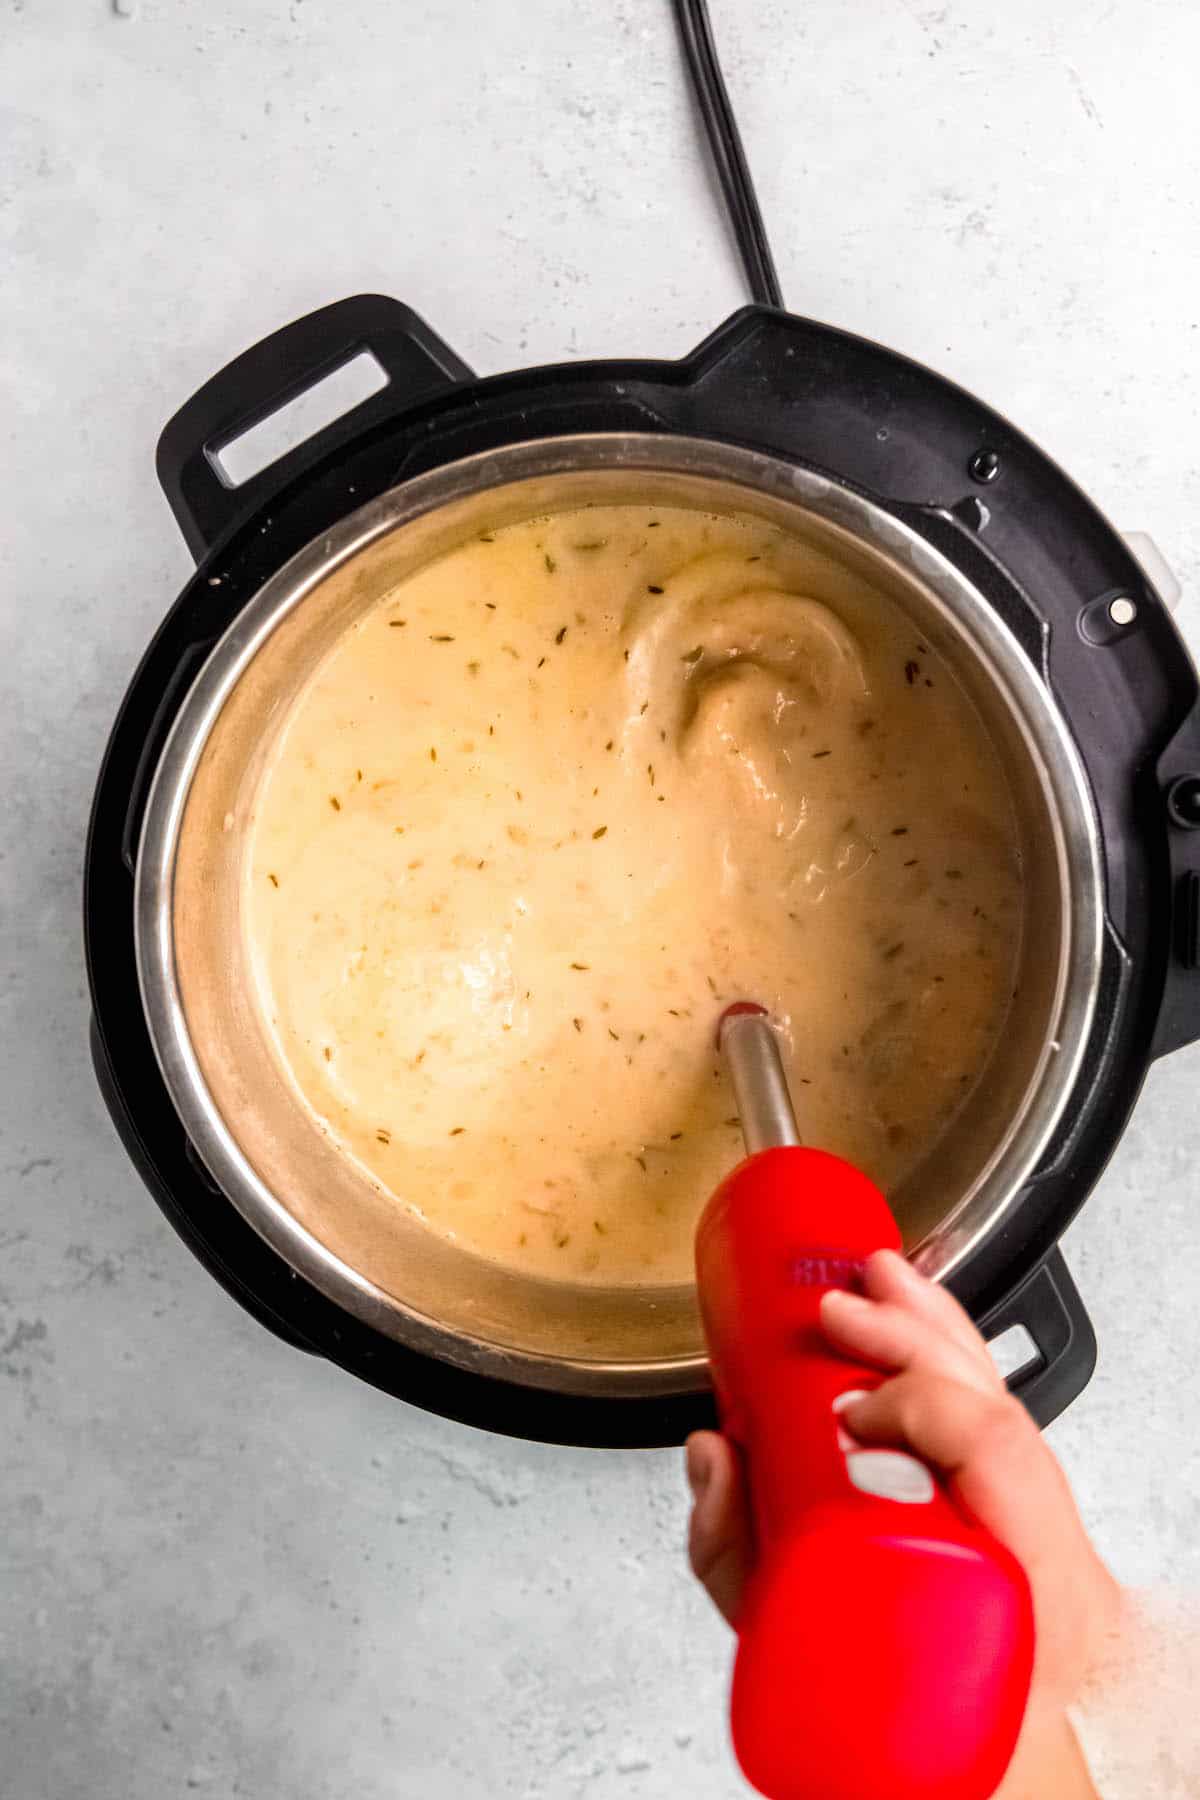 using an immersion blender to blend the potato soup in the instant pot.